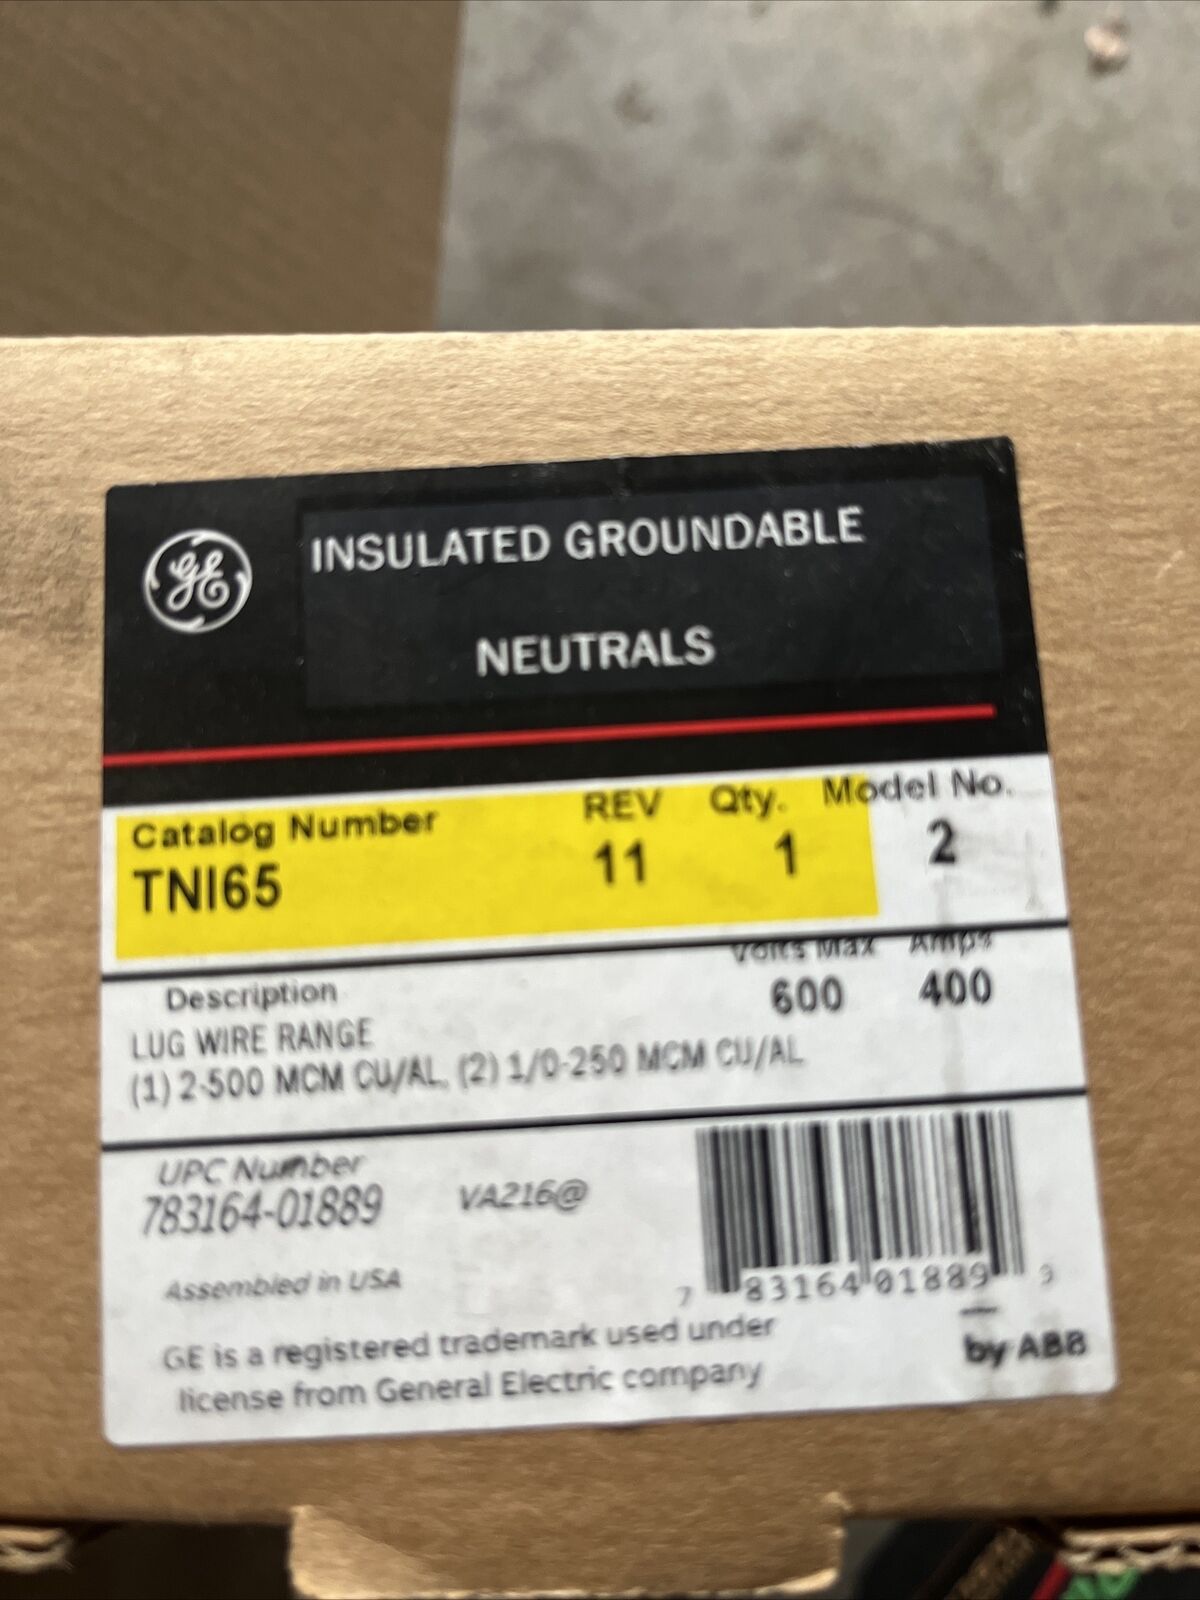 NEW GENERAL ELECTRIC TN165 600 AMP INSULATED GROUNDABLE NEUTRALS